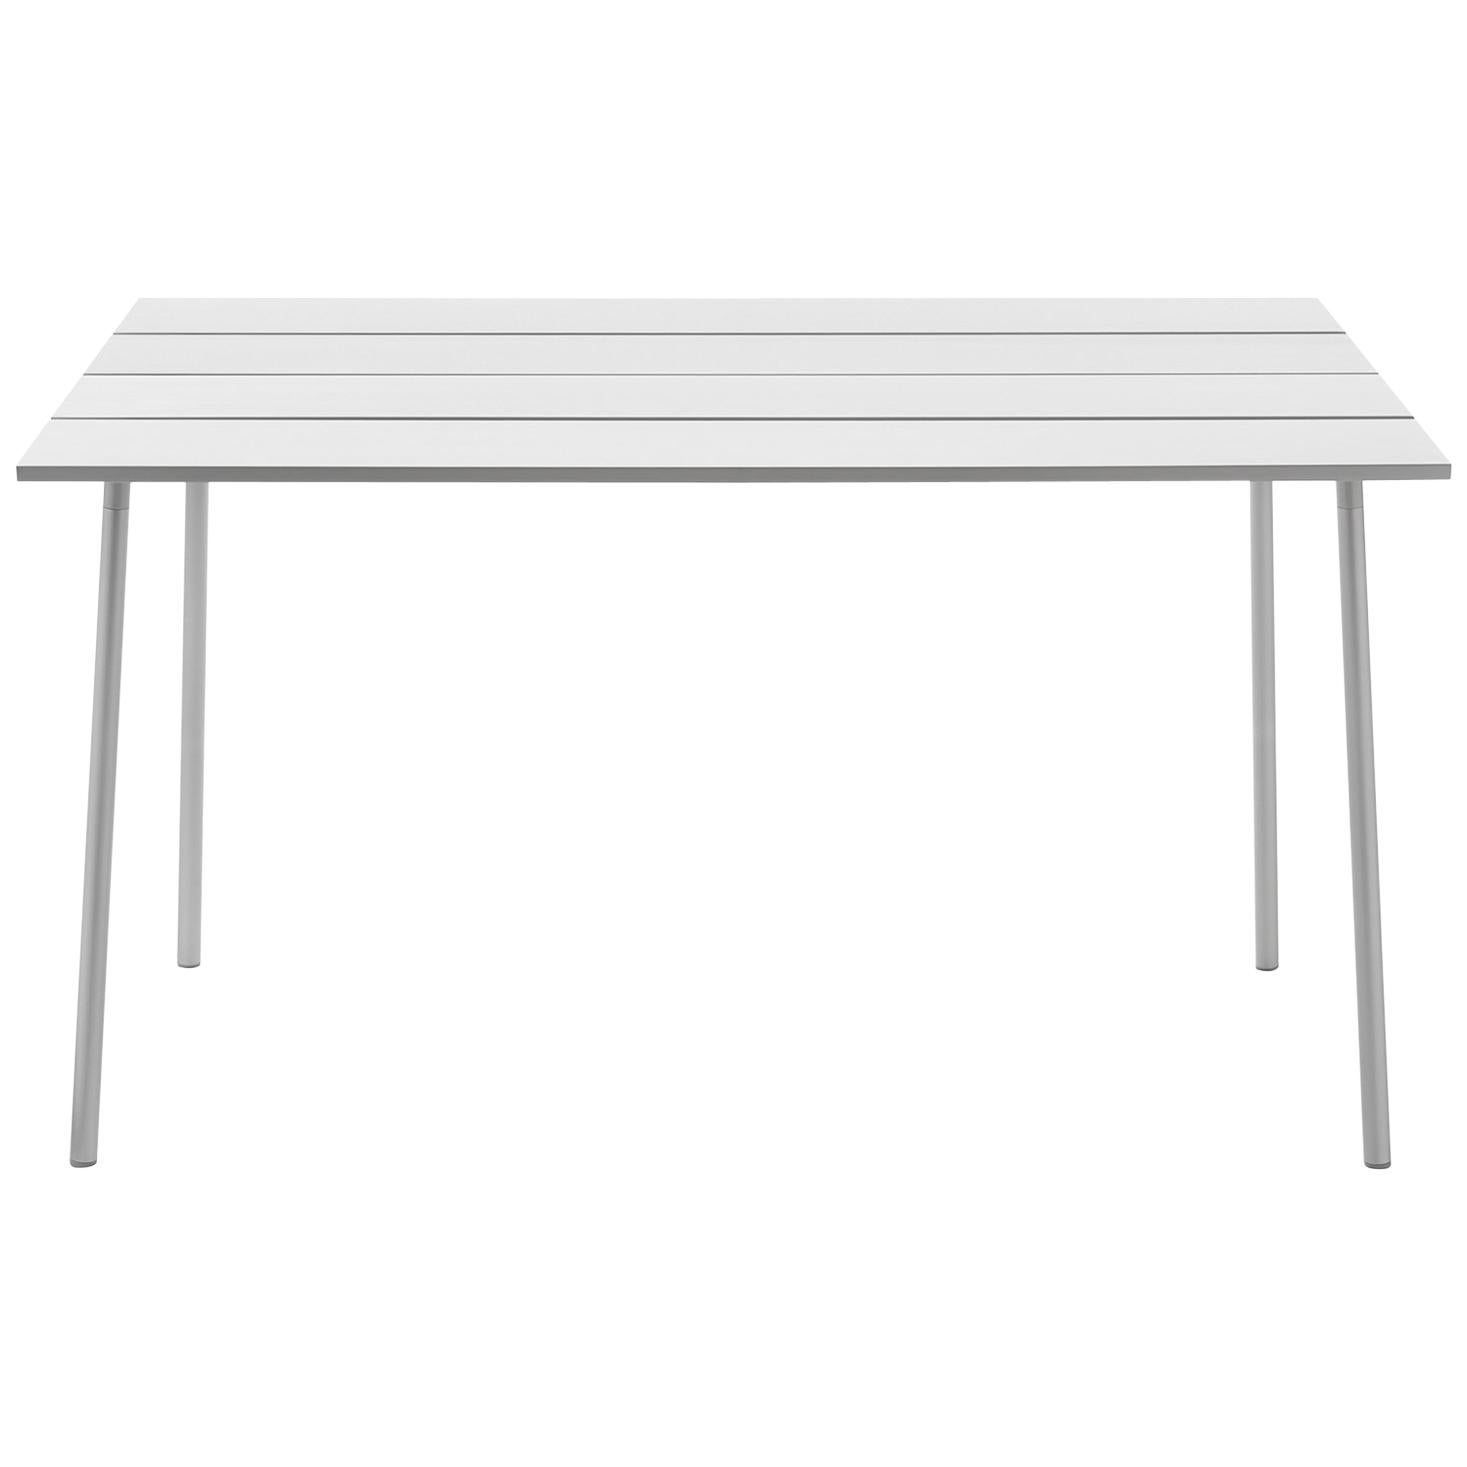 Emeco Run Large High Table in Clear Anodized Aluminum by Sam Hecht & Kim Colin